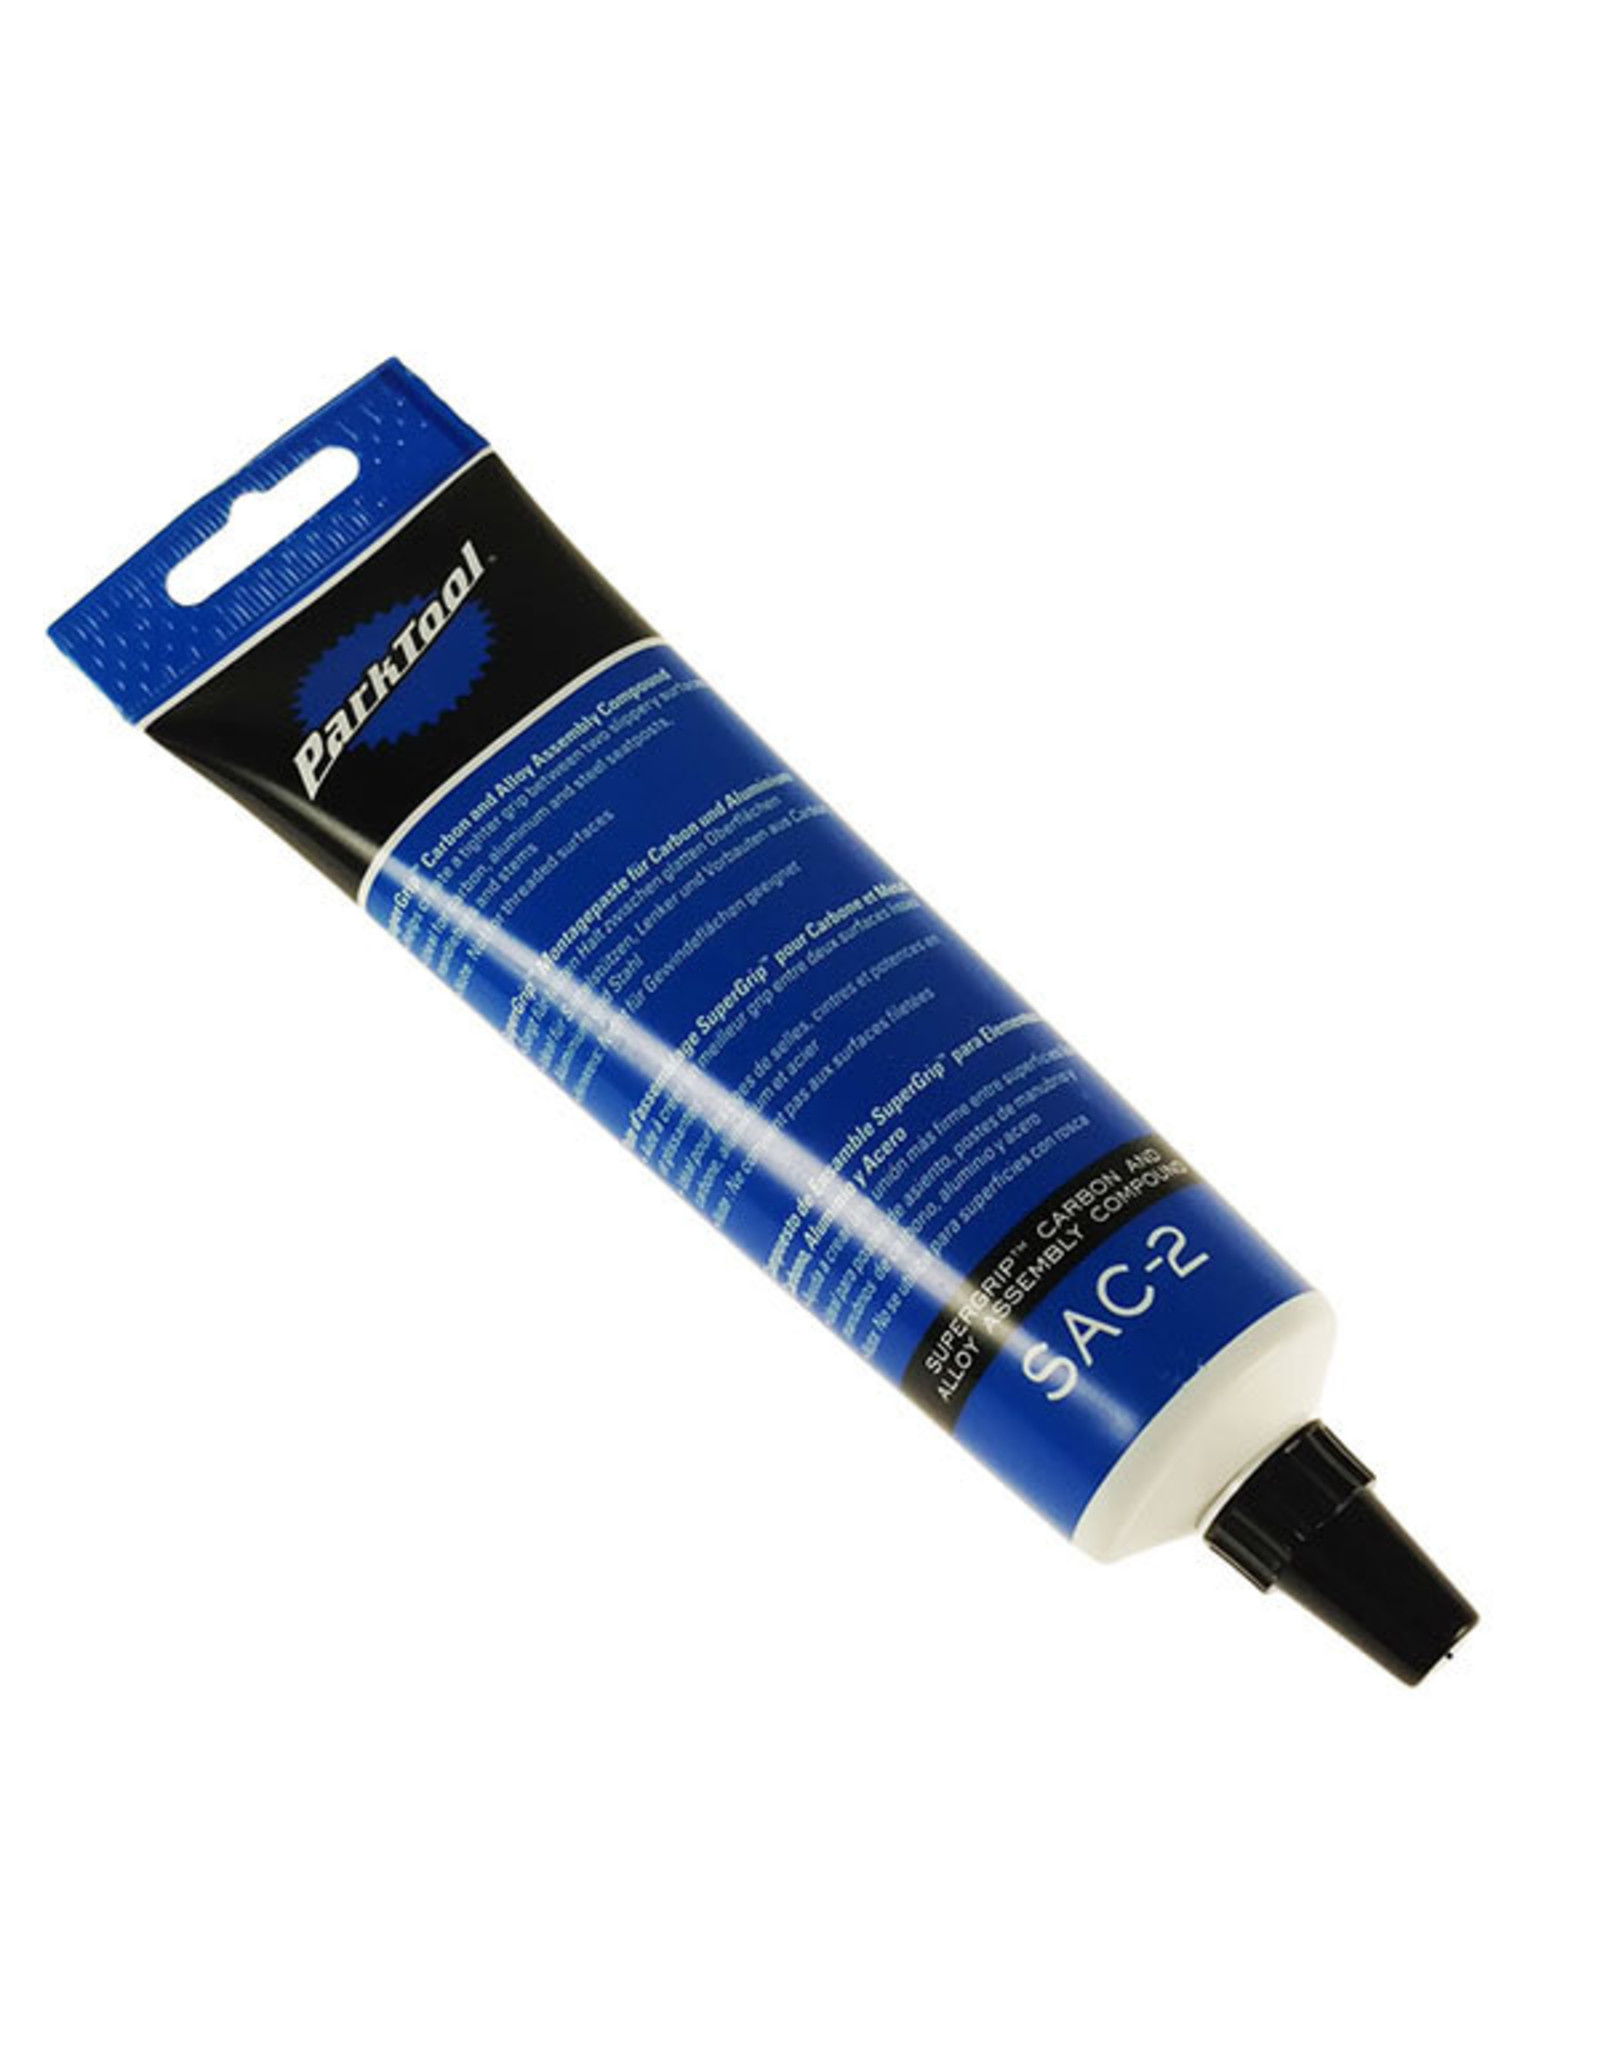 Park Tool Park Tool SAC-2 Supergrip Carbon and Alloy Assembly Compound - 4 oz